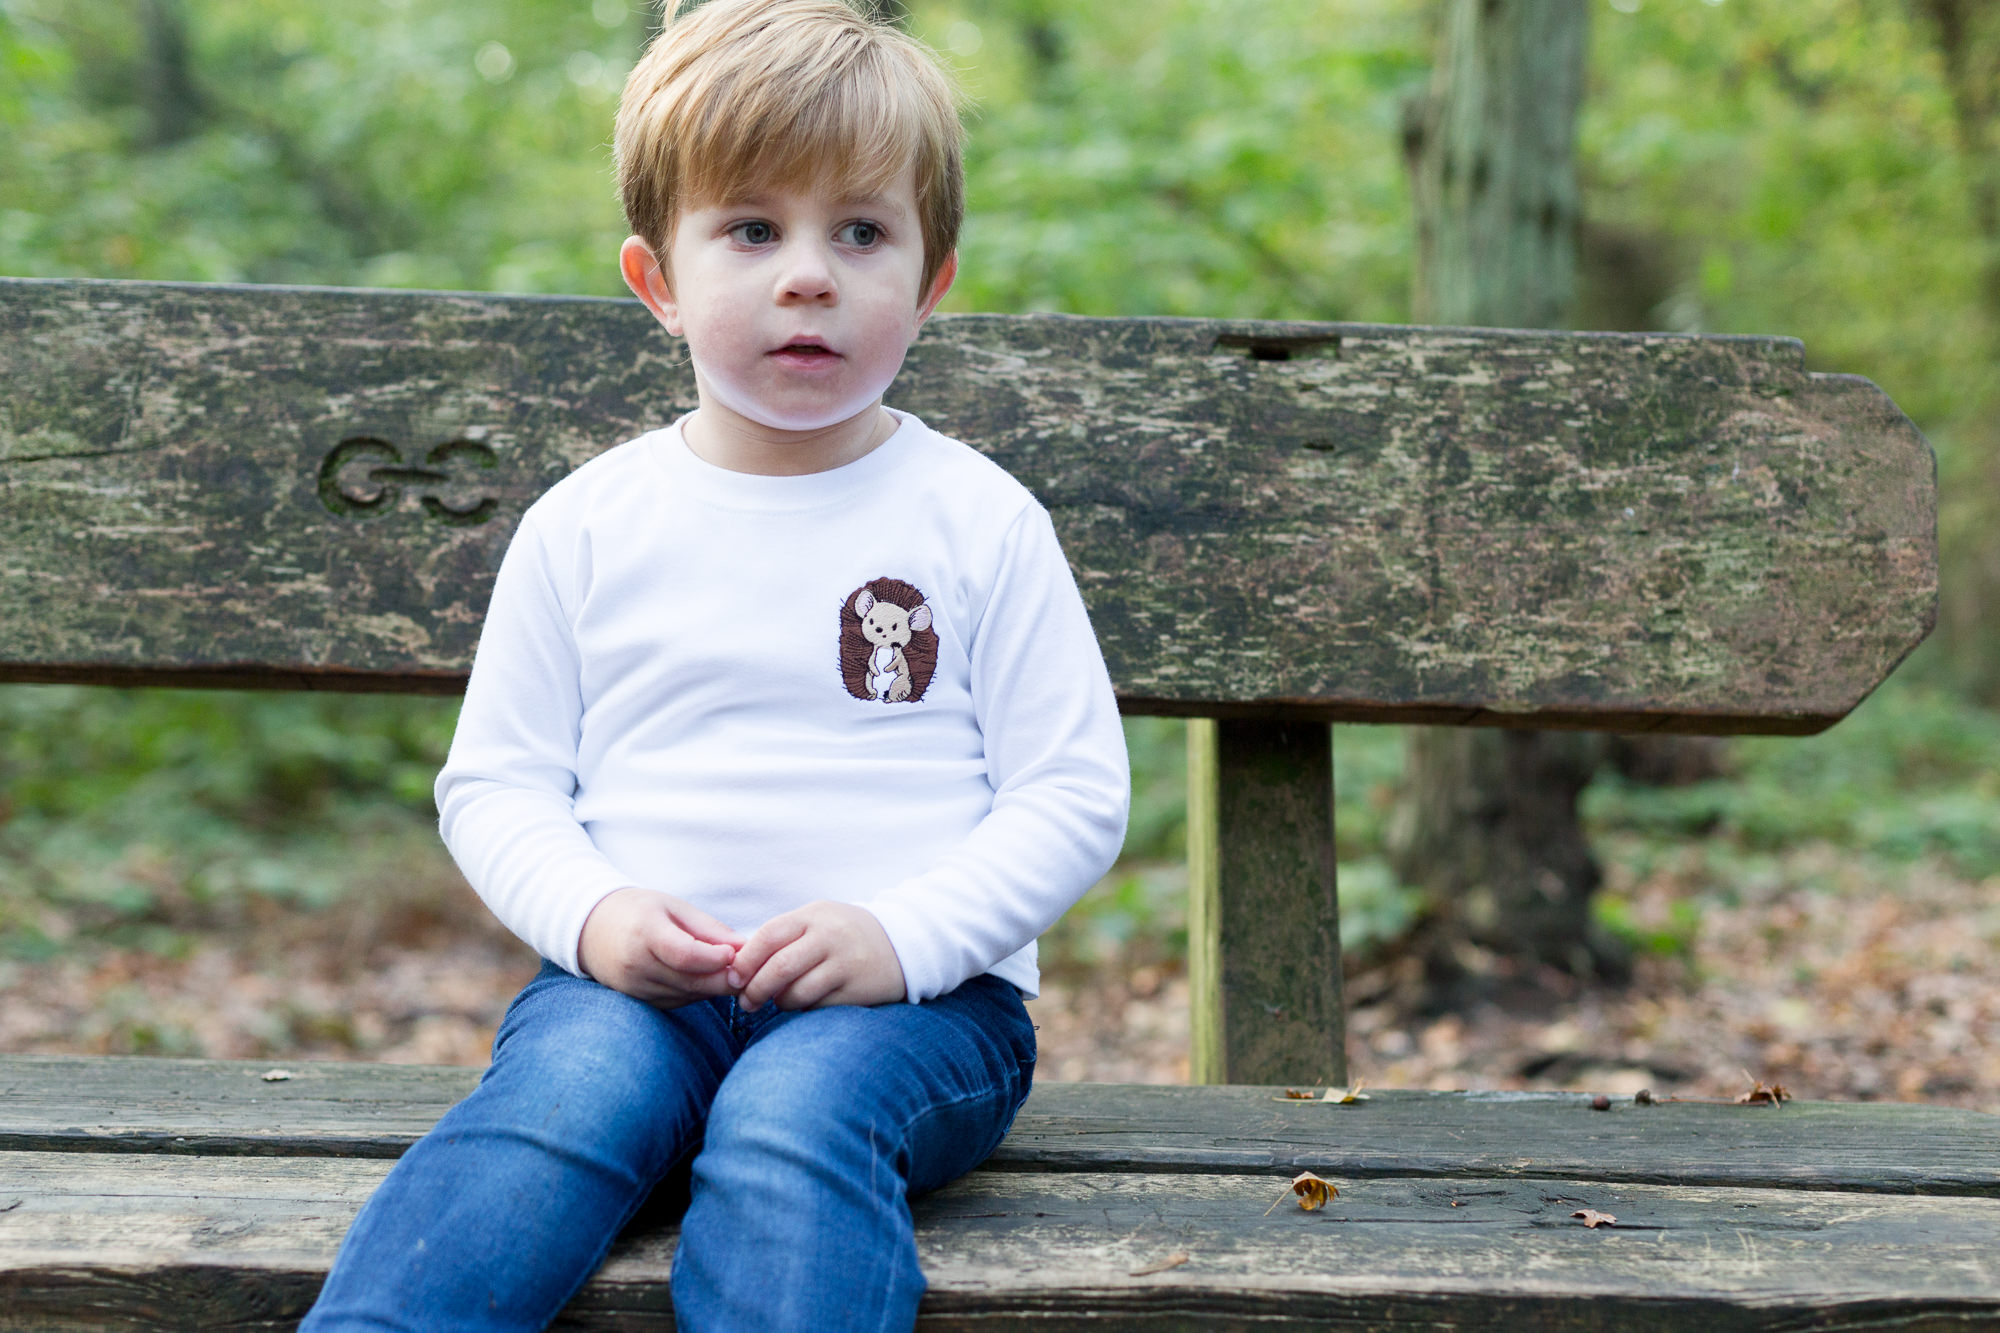 clothing brand model shoot by Nina Callow Commercial and Family photographer Bexley, London 